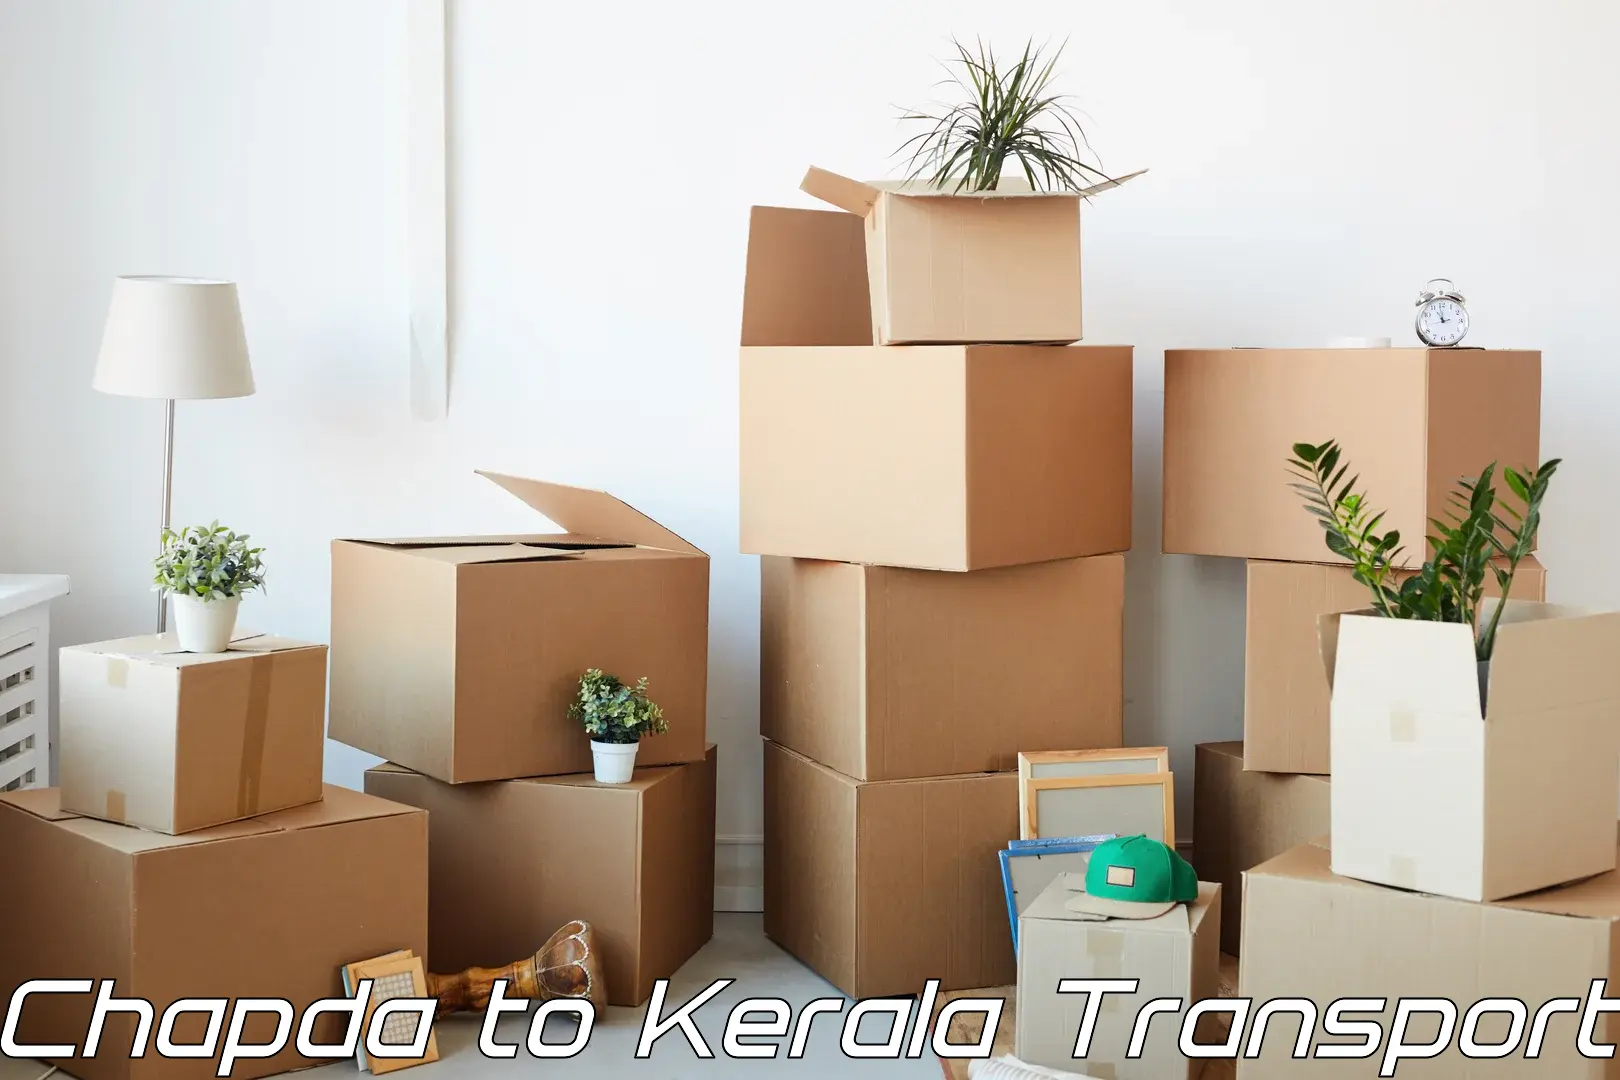 Container transport service Chapda to Kannur